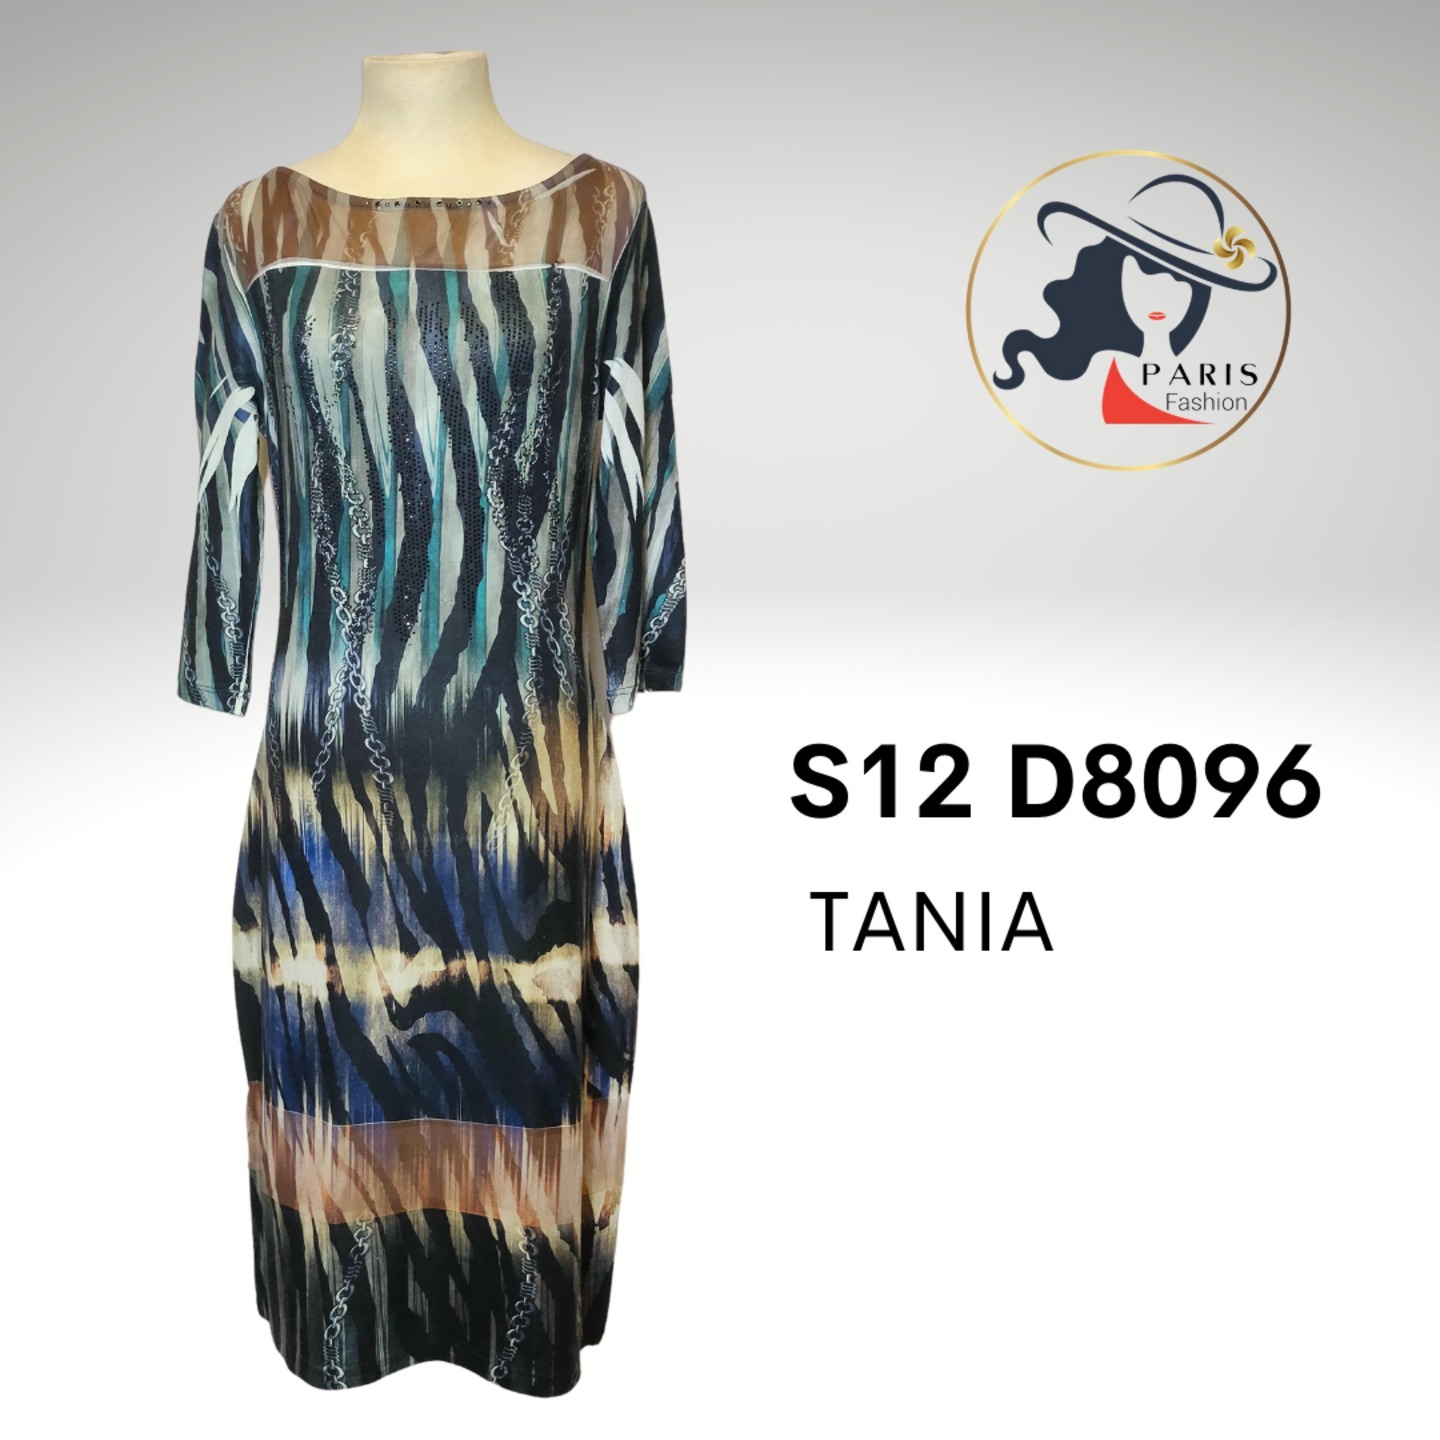 S12 D8096 TANIA MIDI KNIT DRESS WITH SEQUINS DETAILS IN ANIMAL PRINT